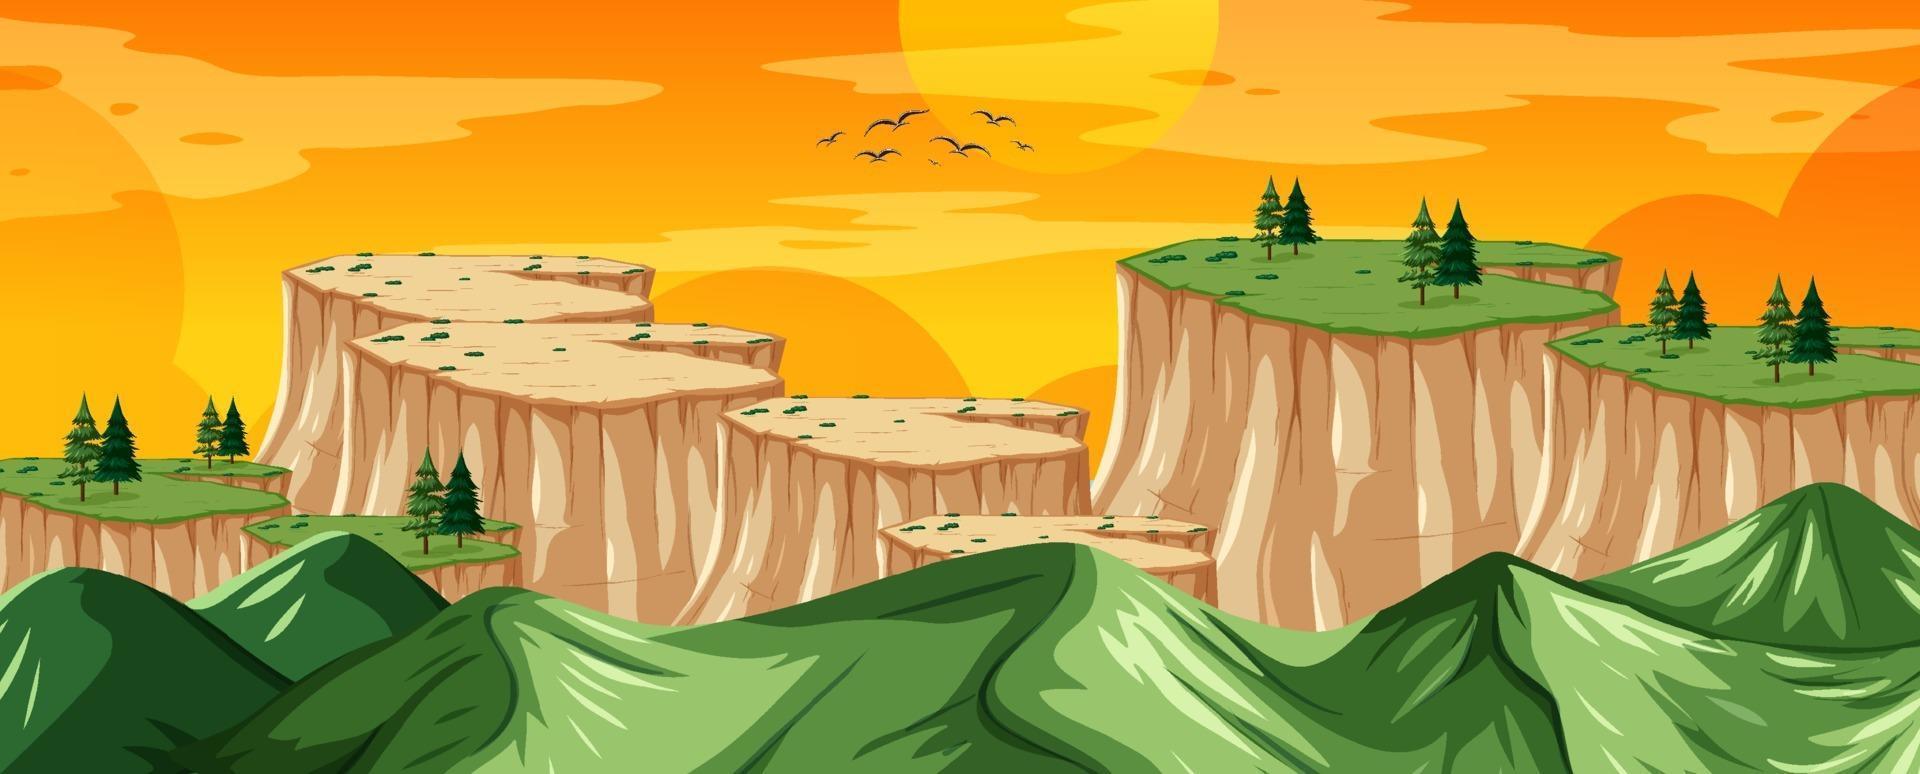 Nature landscape scenery view from a mountain top vector